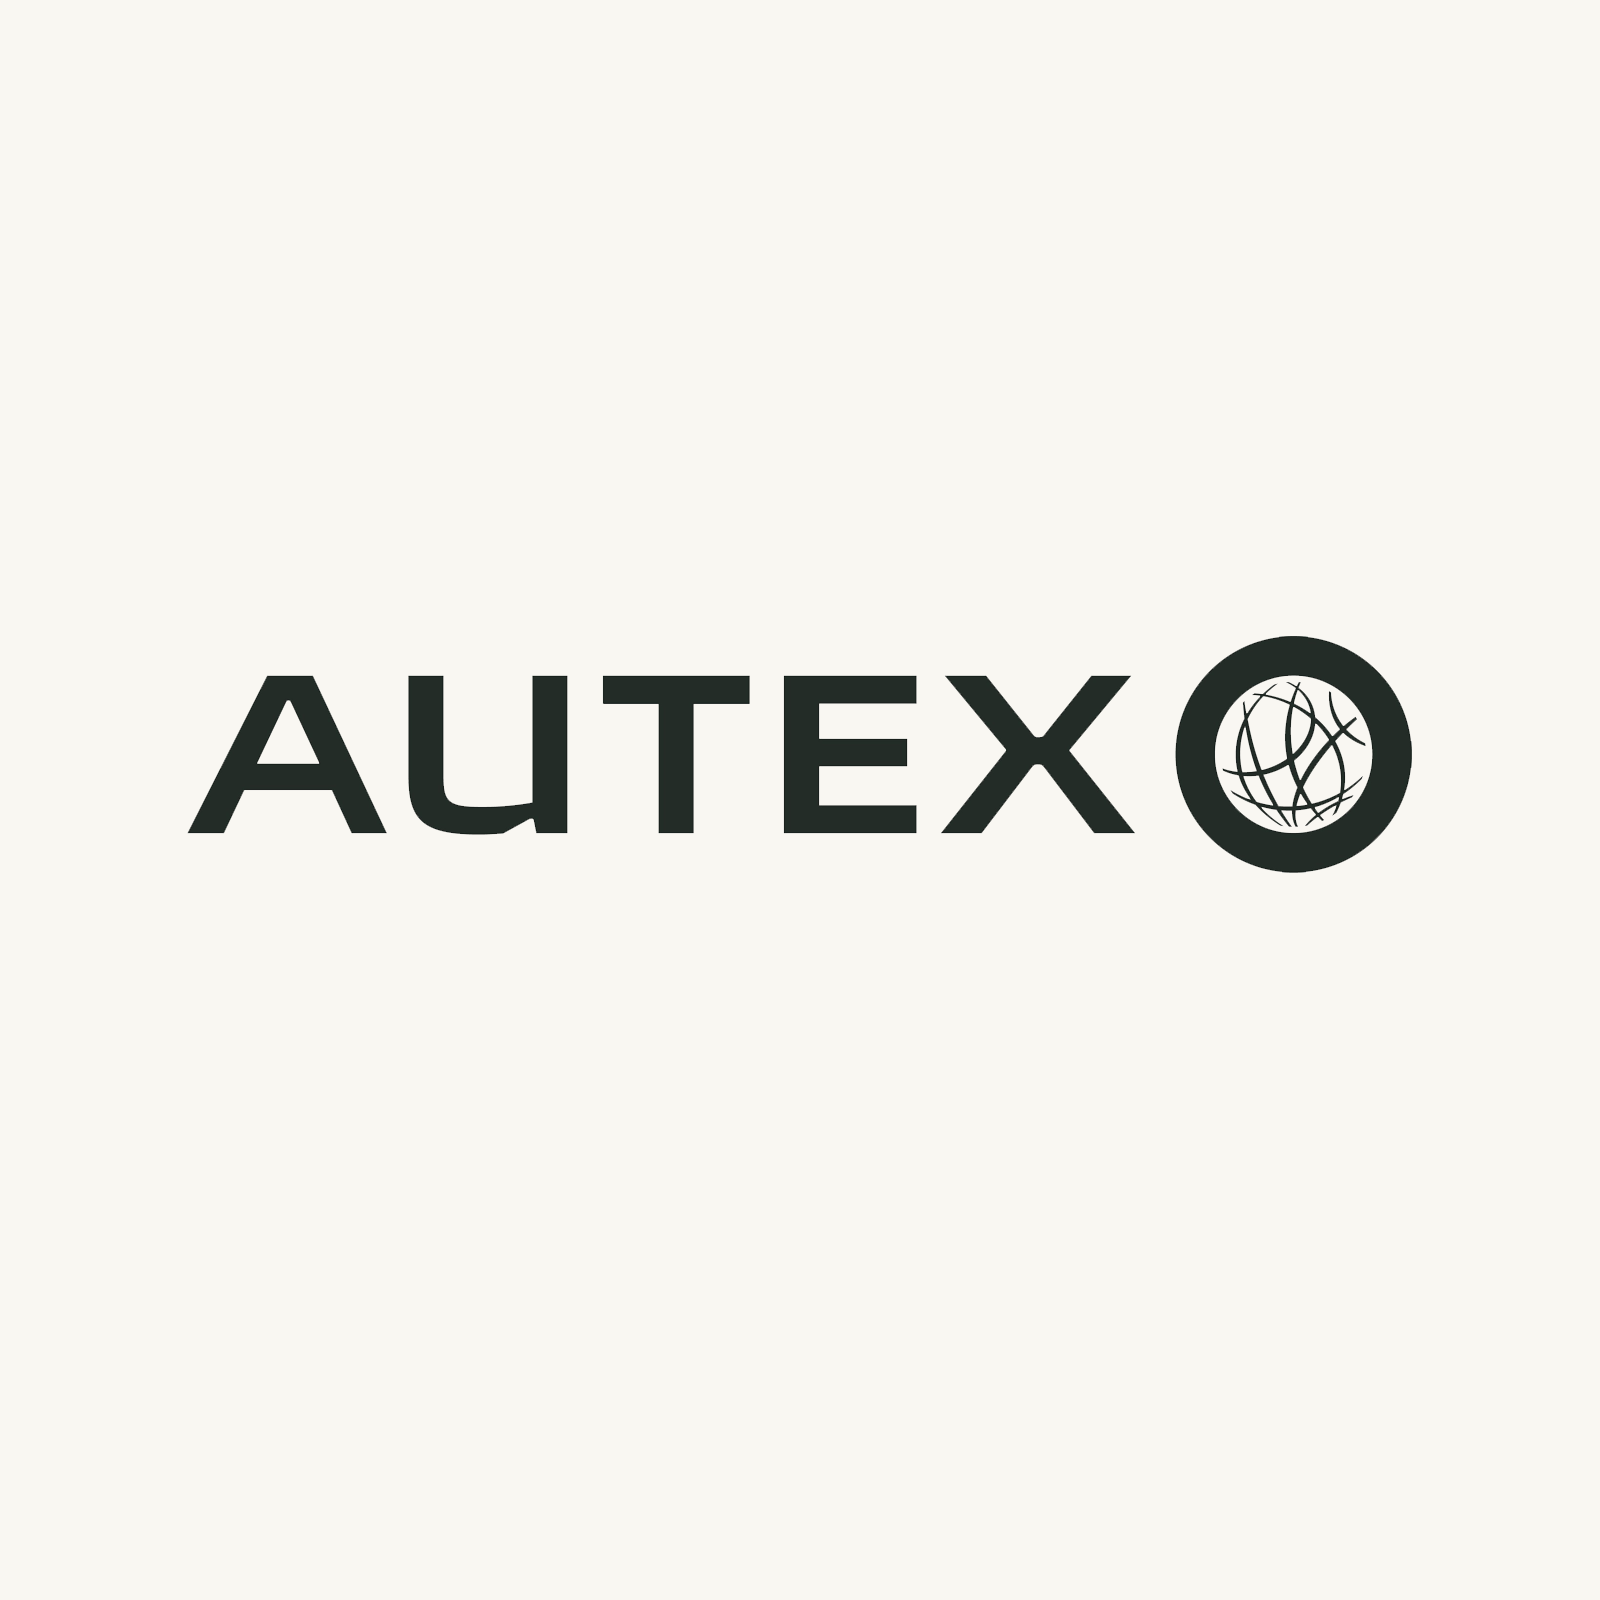 Katherine Wang appointed as Purchasing and Inventory Coordinator, 12 month contract, at Autex.